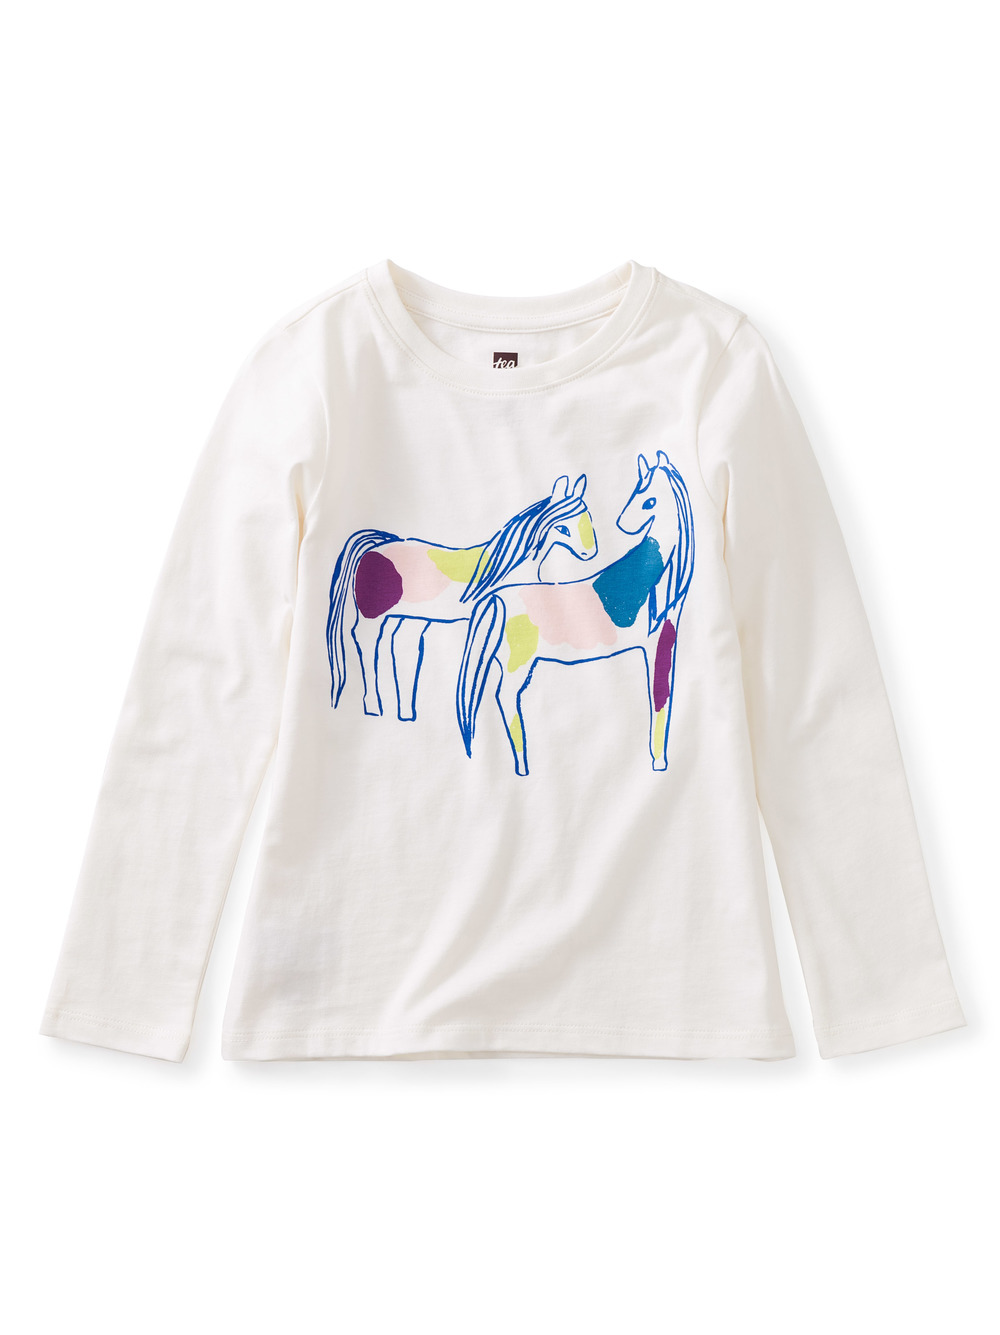 Spotted Horses Graphic Tee